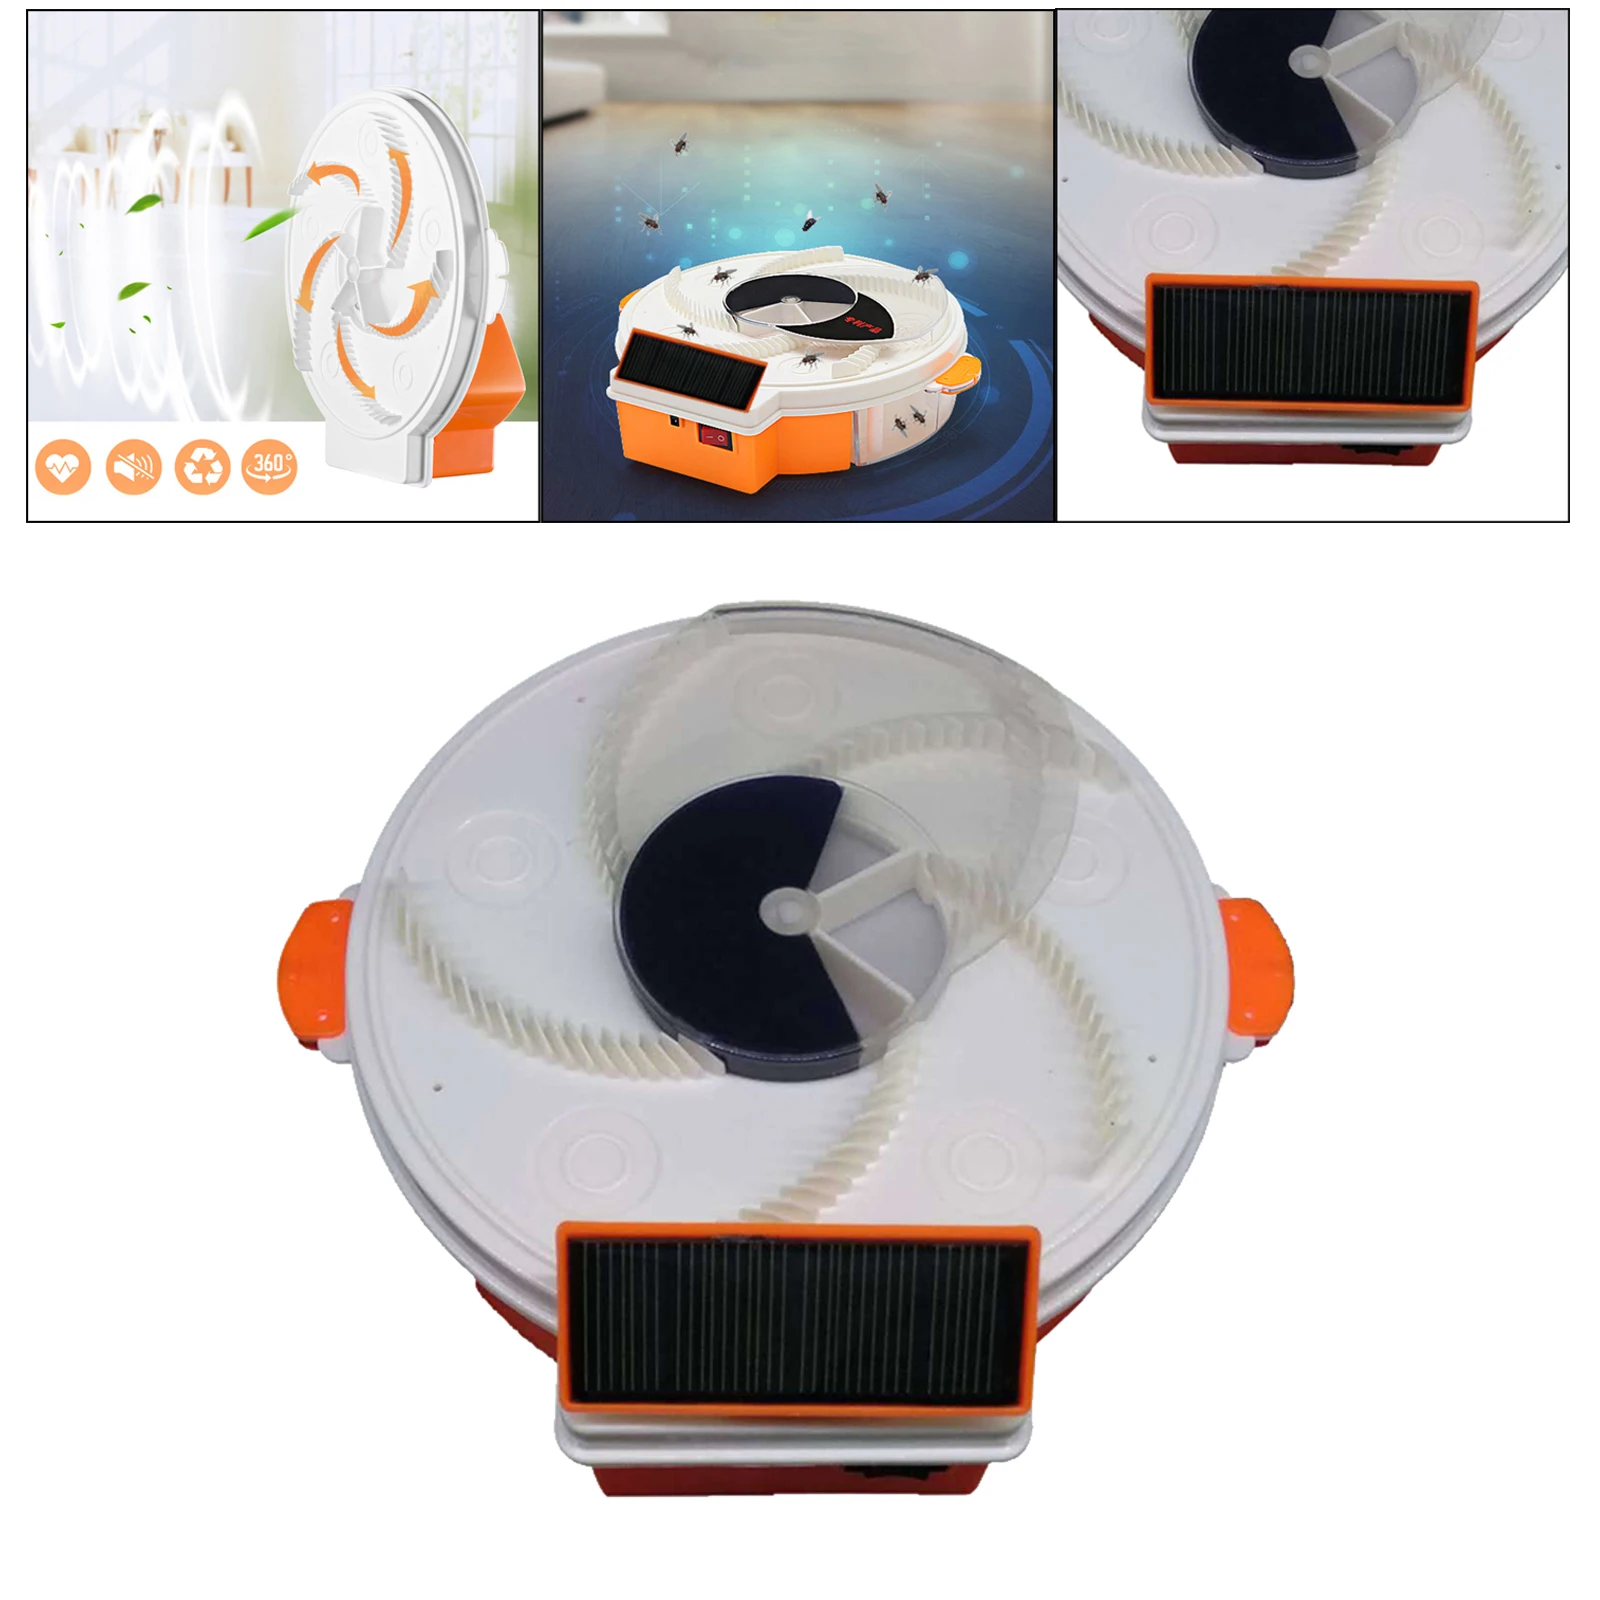 Solar Powered Electric Fly Trap Flycatcher USB Charging Fly Trap Reject Control Catcher Insect Repellents Tools